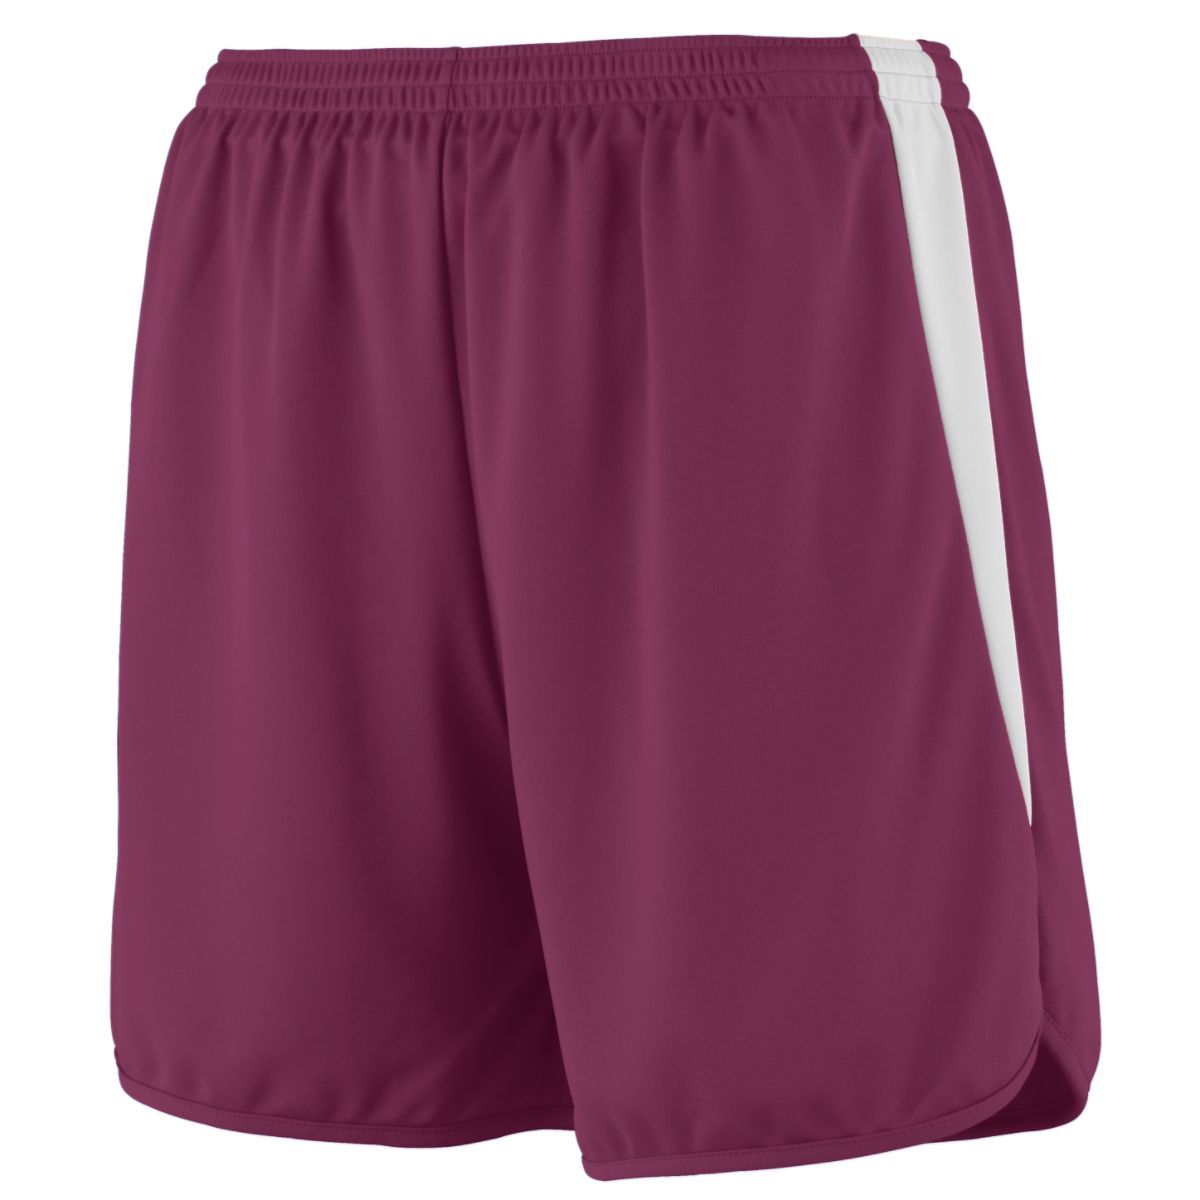 Augusta Sportswear Rapidpace Track Shorts in Maroon/White  -Part of the Adult, Adult-Shorts, Augusta-Products, Track-Field product lines at KanaleyCreations.com